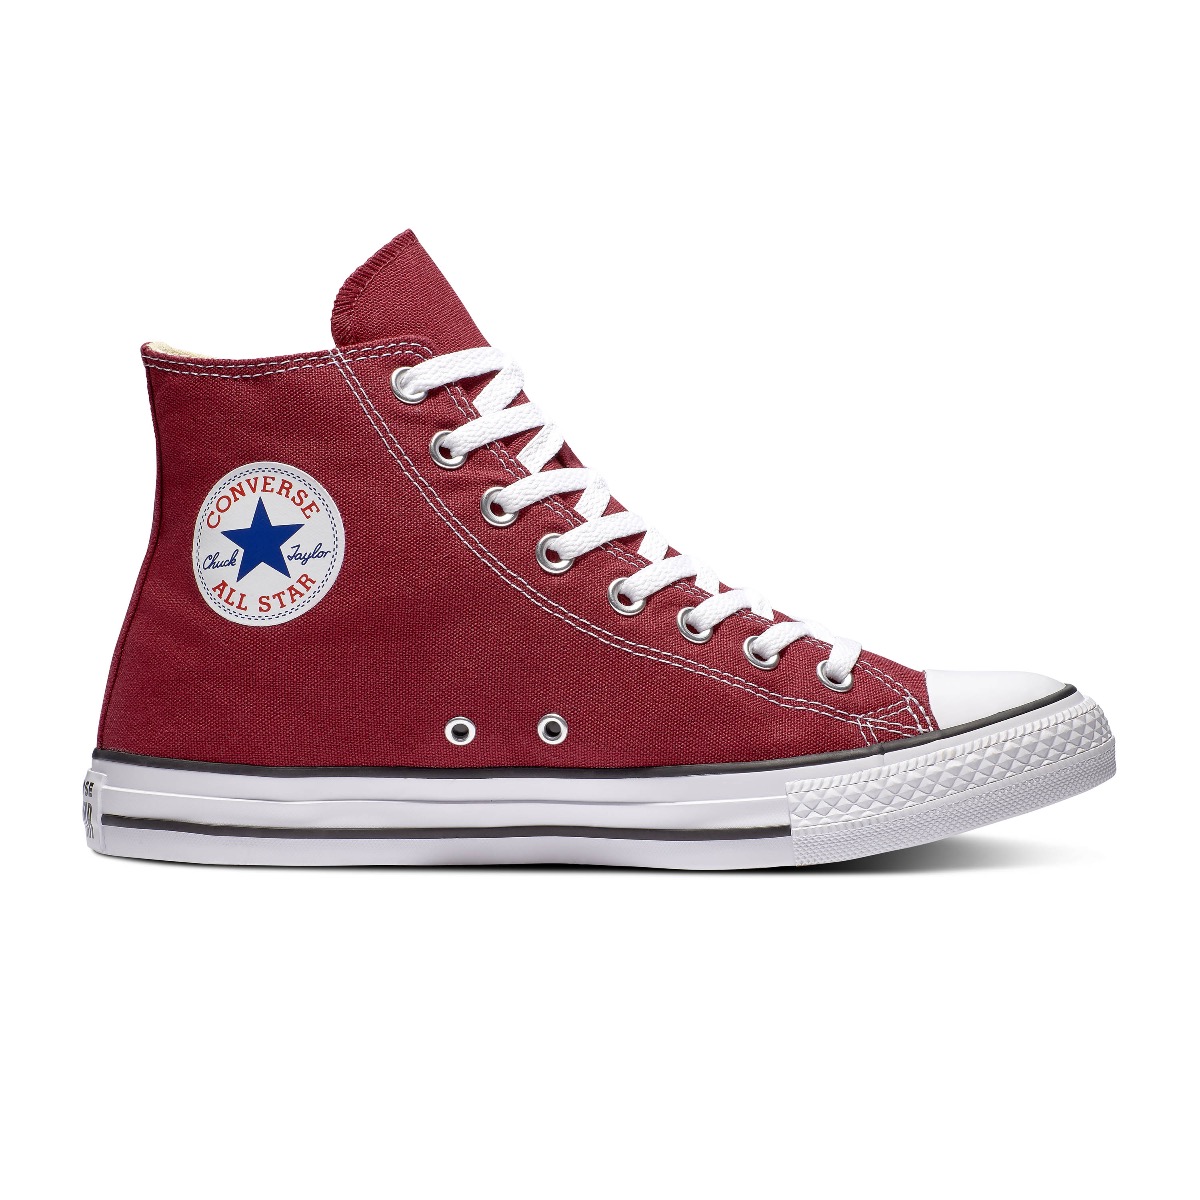 sneakers Converse M9613C Sneakers Textile Fabric